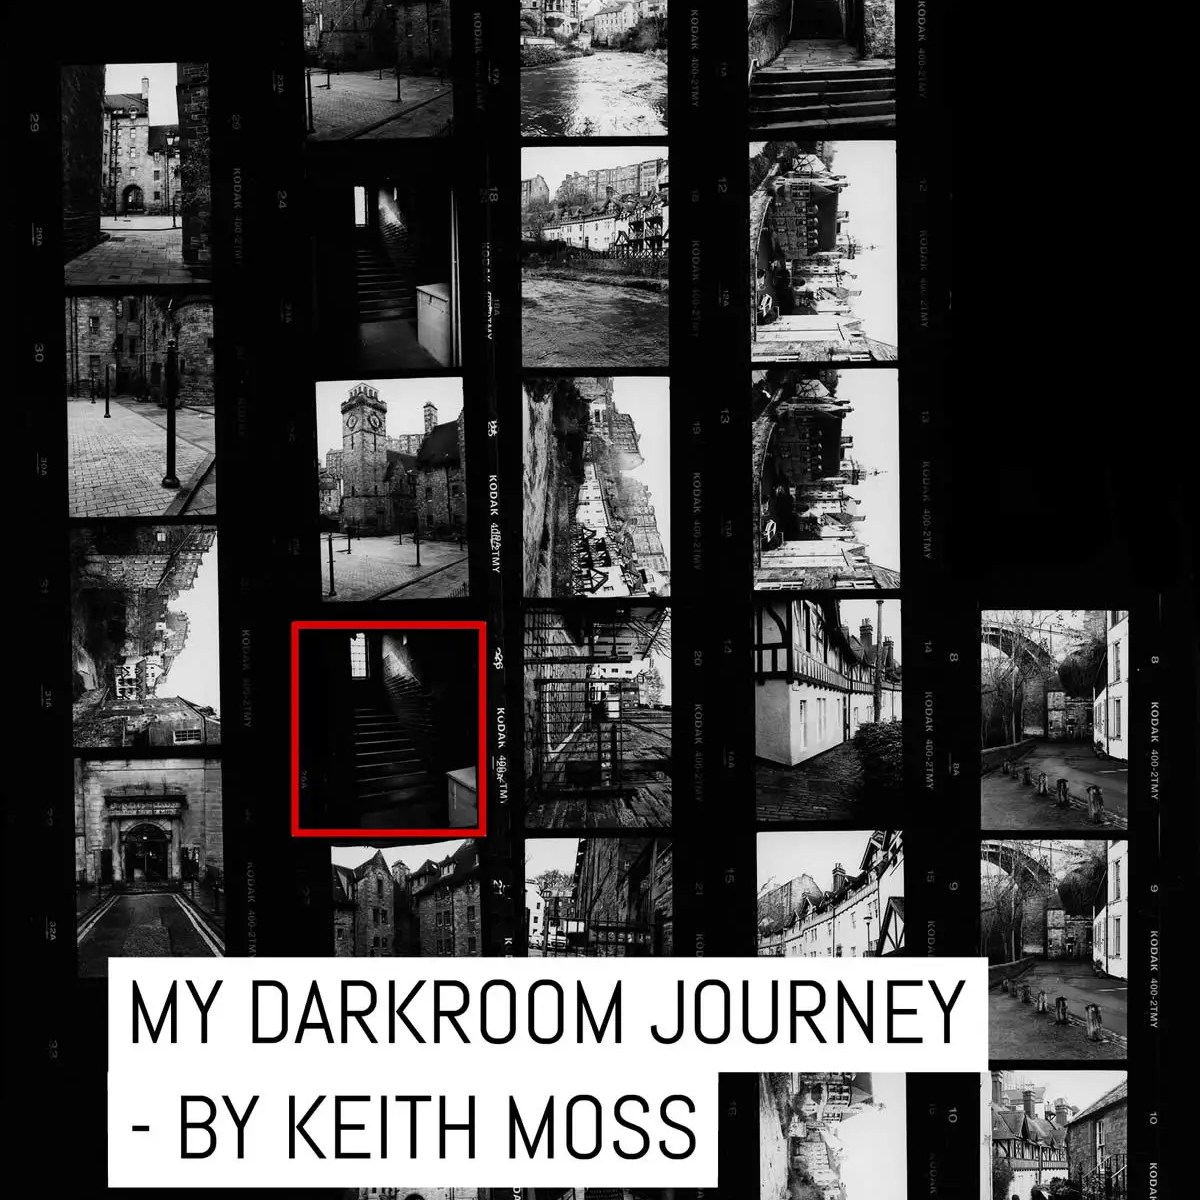 Cover: My darkroom journey - by Keith Moss